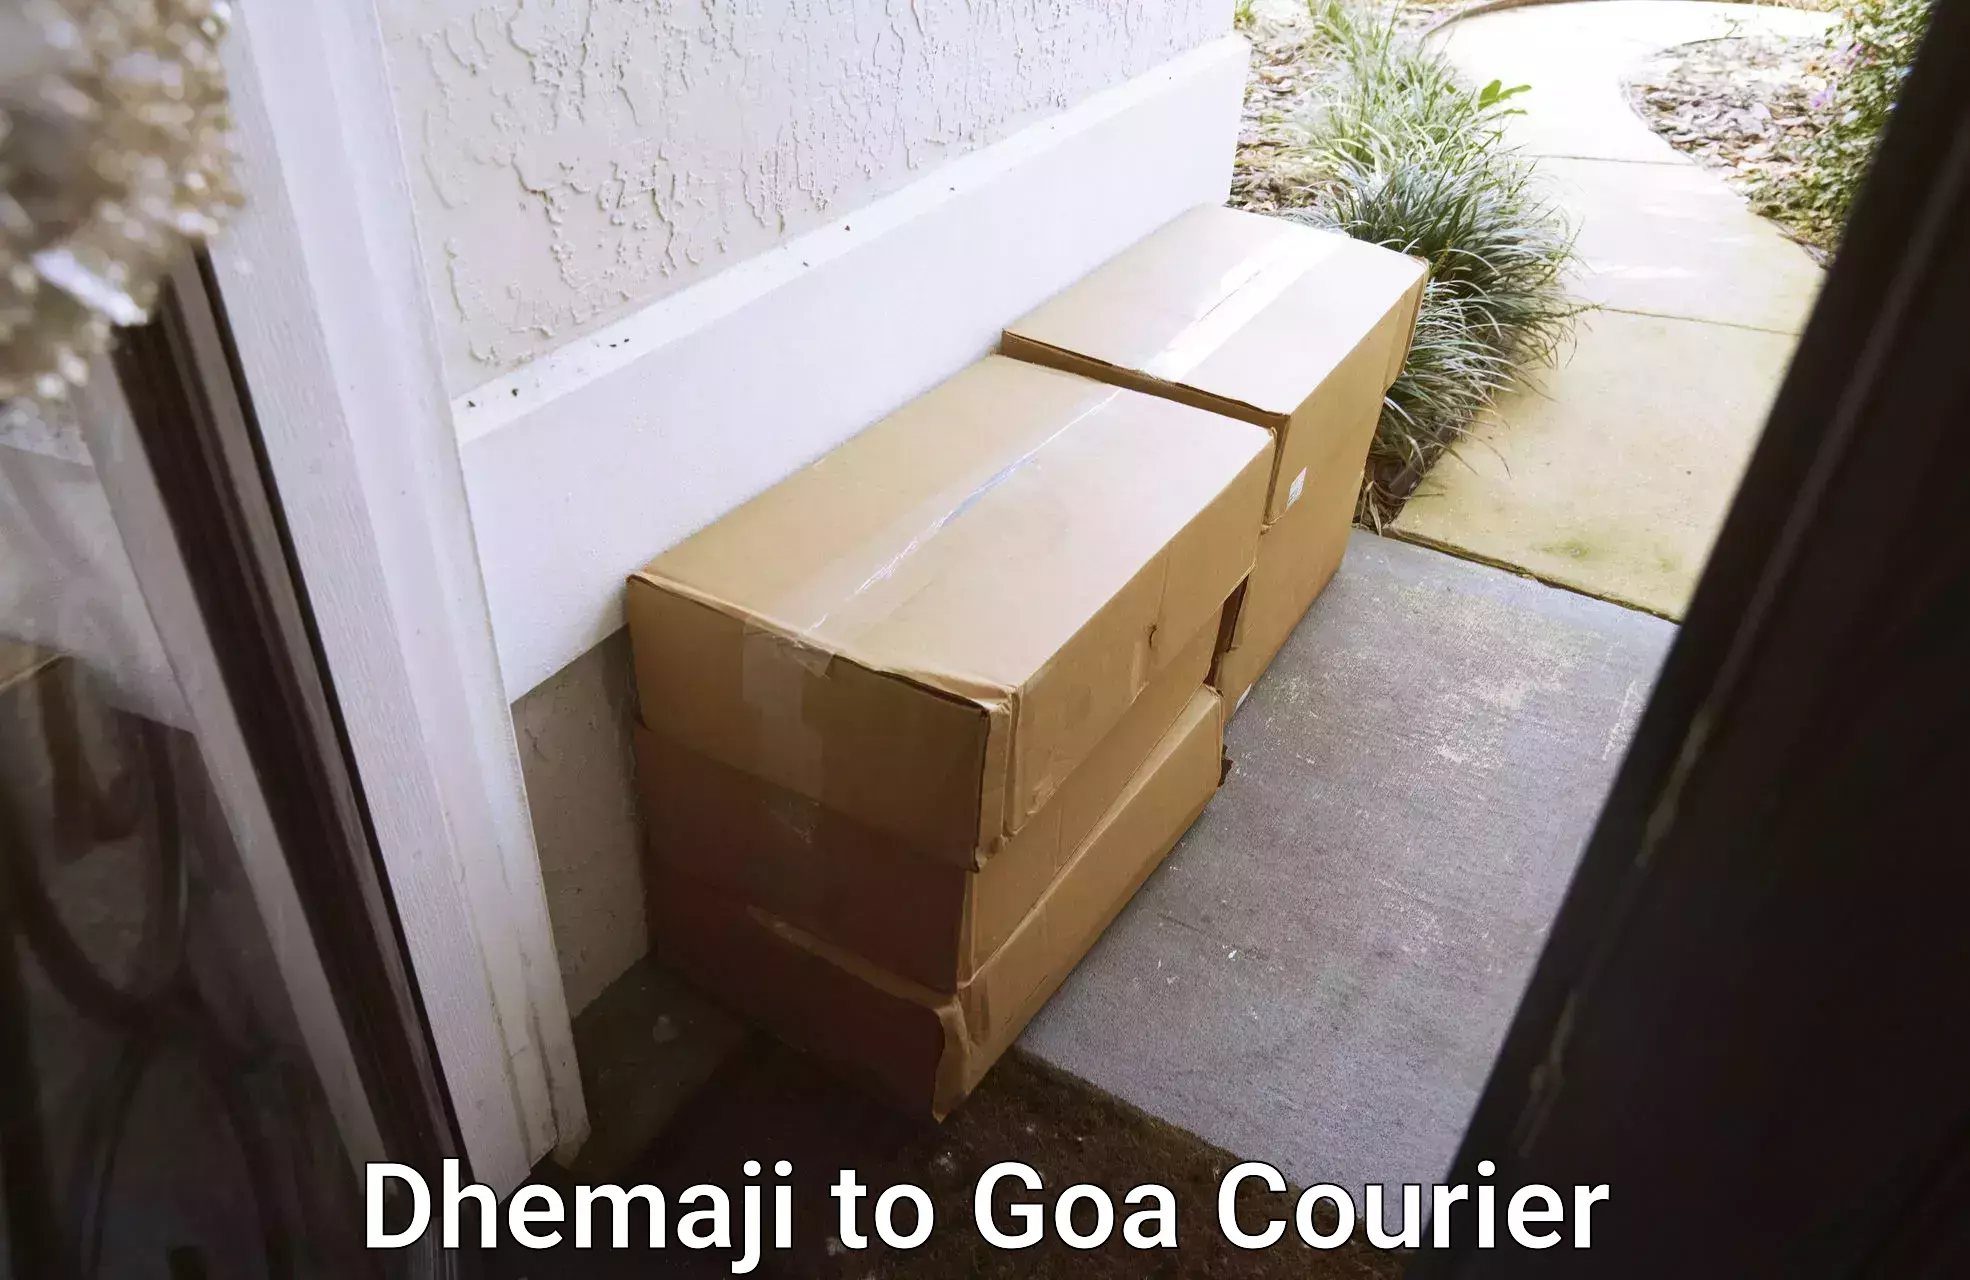 Nationwide delivery network Dhemaji to Goa